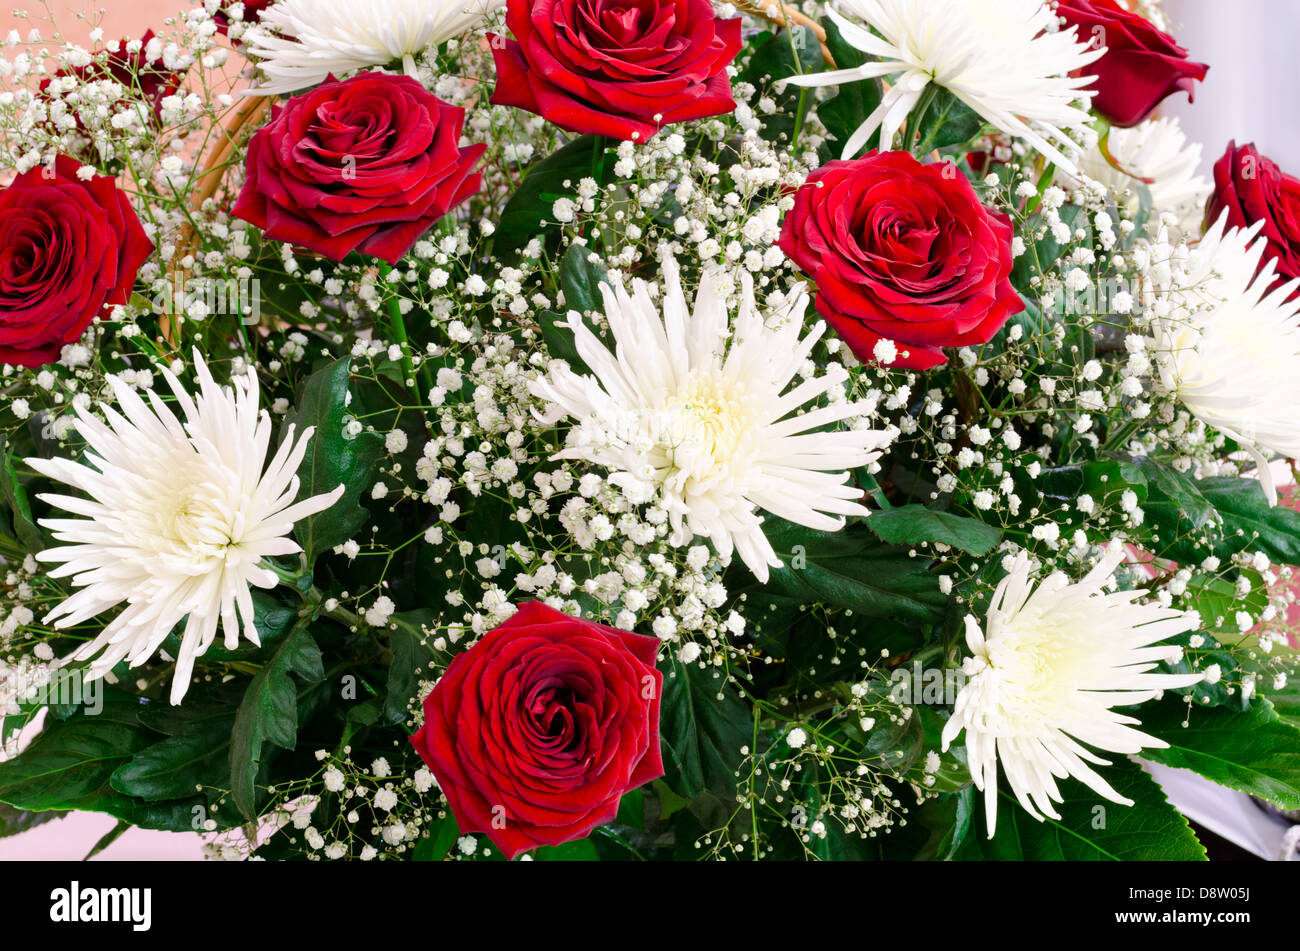 red roses and white chrysanthemums Stock Photo